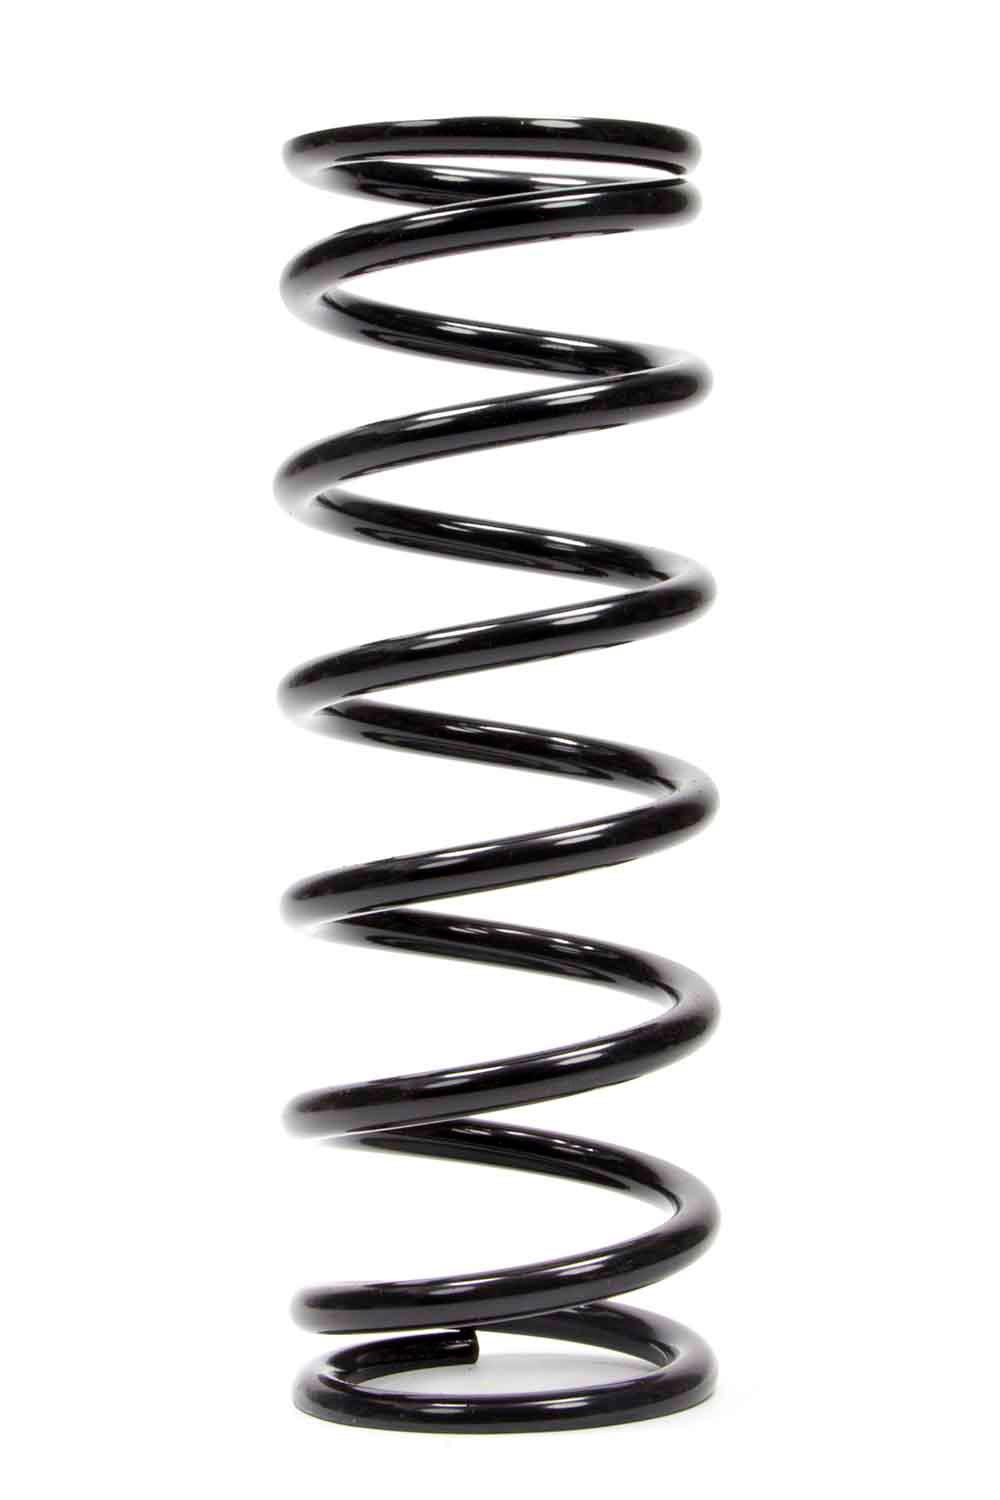 Coil-Over Spring 10in x 2.625in x 200lb - Burlile Performance Products